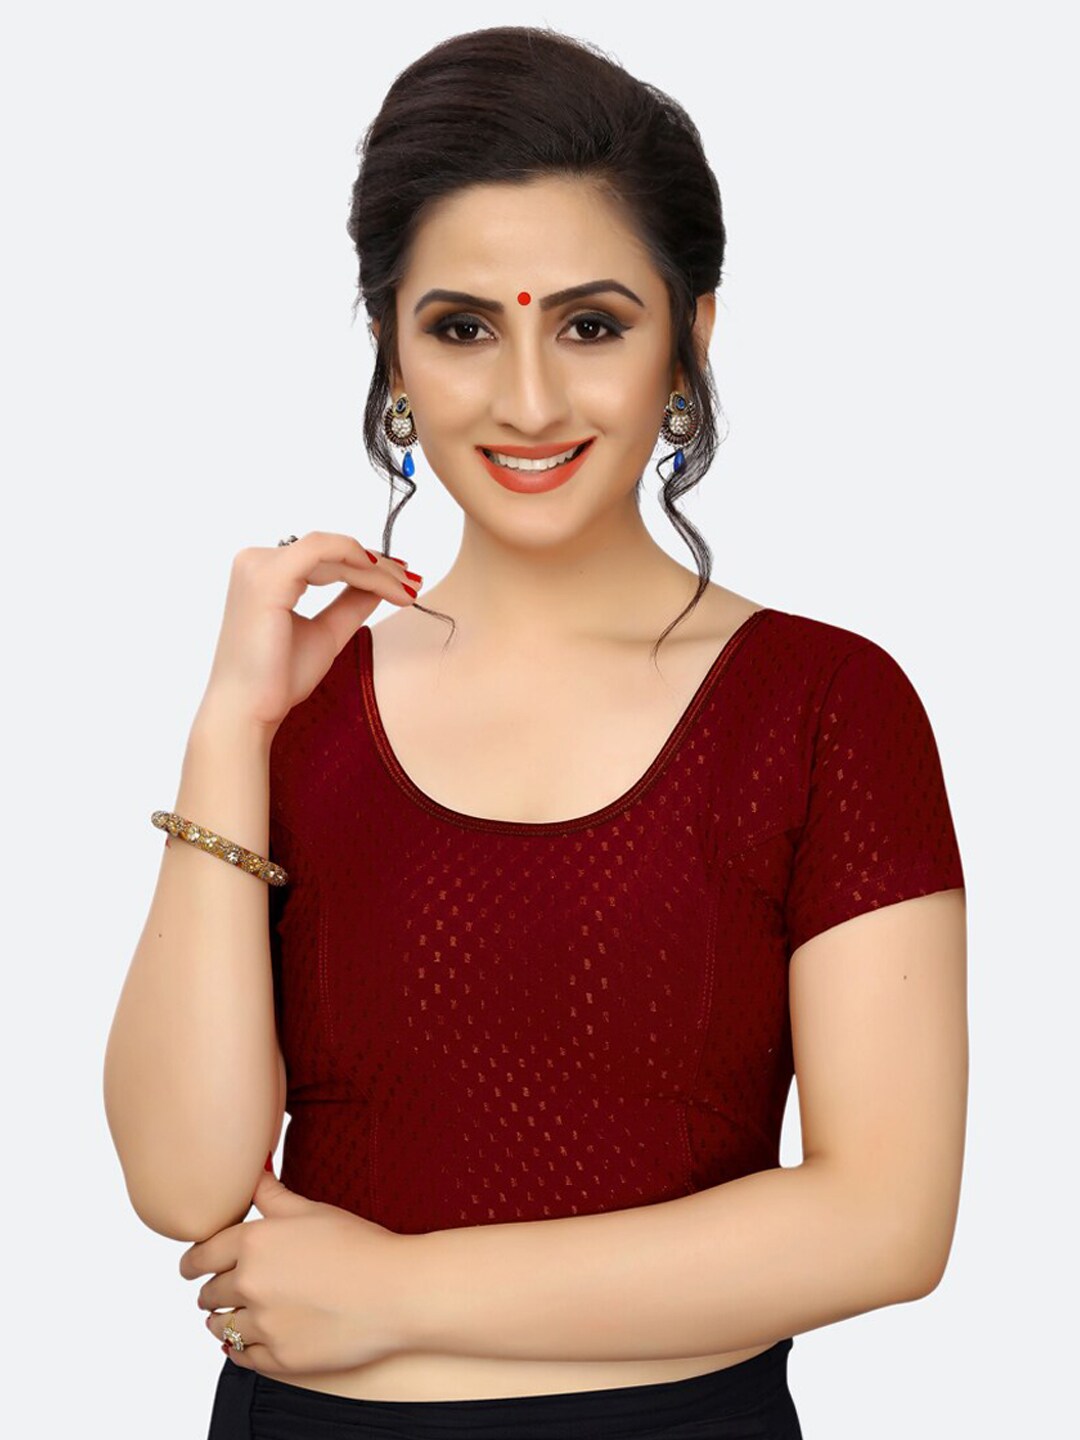 SIRIL Maroon Cotton Embellished Saree Blouse Price in India